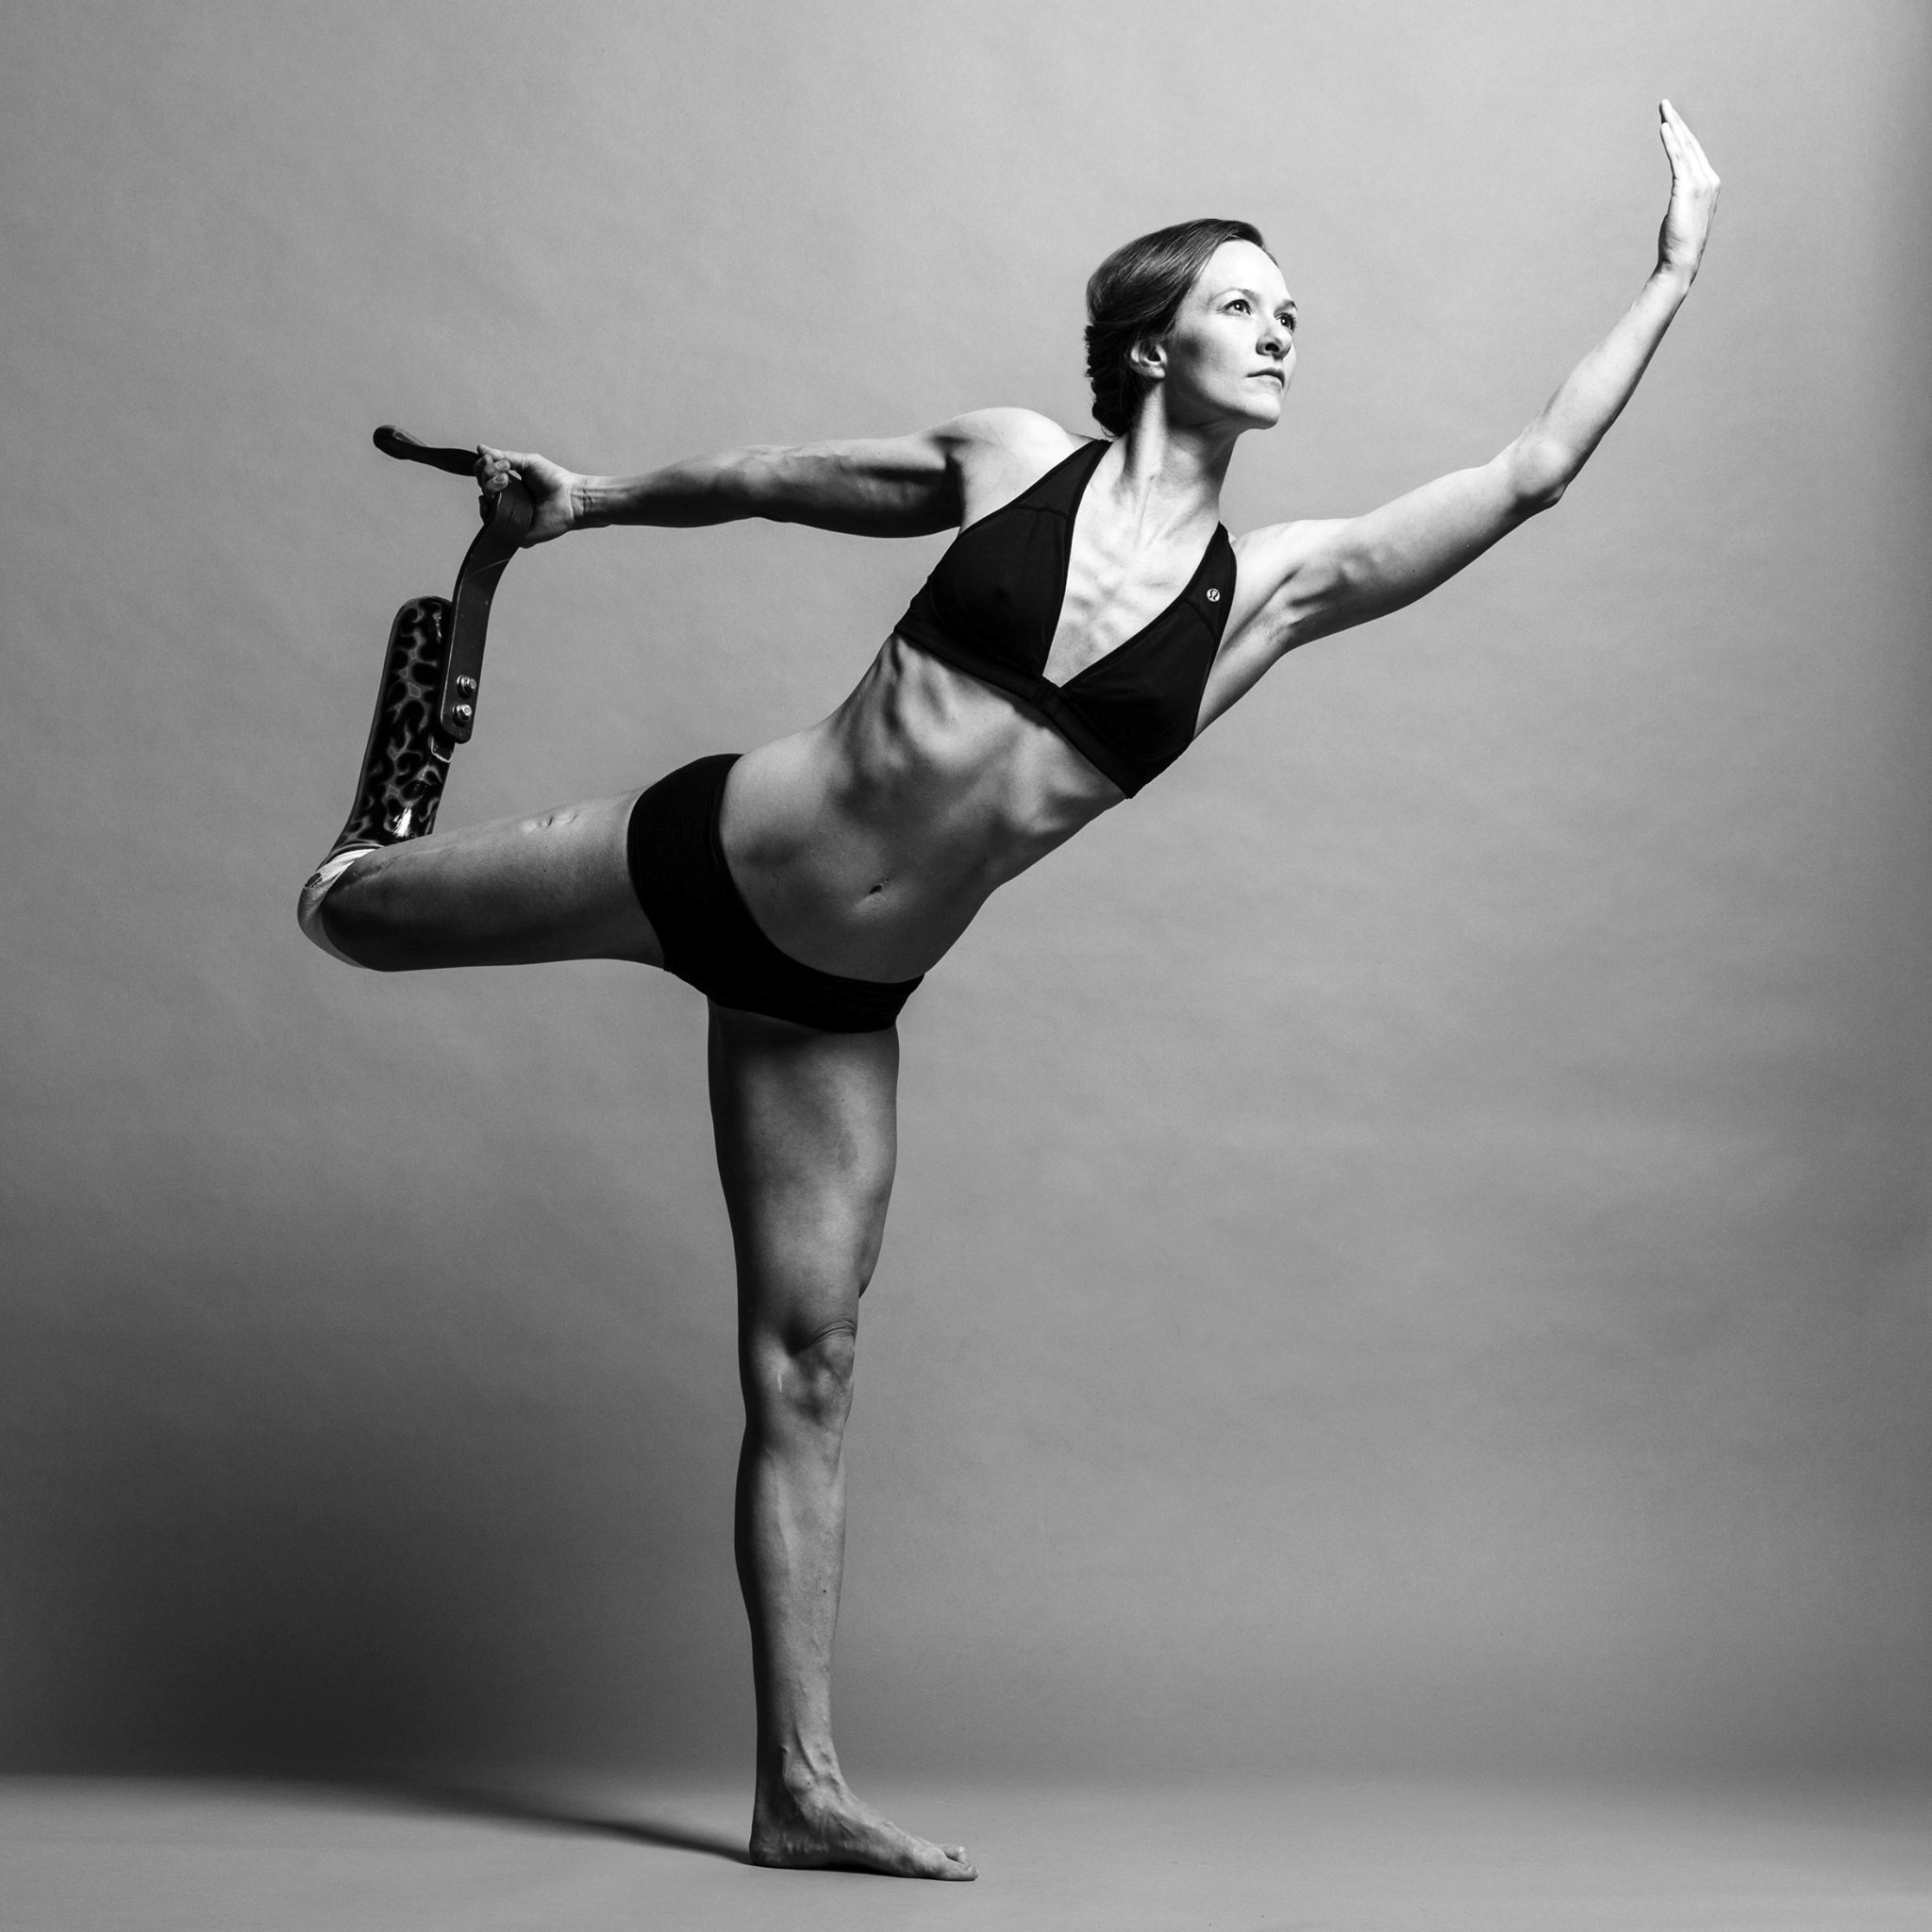 A powerful photo of Kristi standing on one leg, with her other leg (with her prosthetic) bent back behind her. She holds the base of her prosthetic leg with her right arm. Her left arm is held up in front of her and upwards, this is also the direction her face is looking. She is wearing a black set of clothing - a v-neck sports bra and briefs.